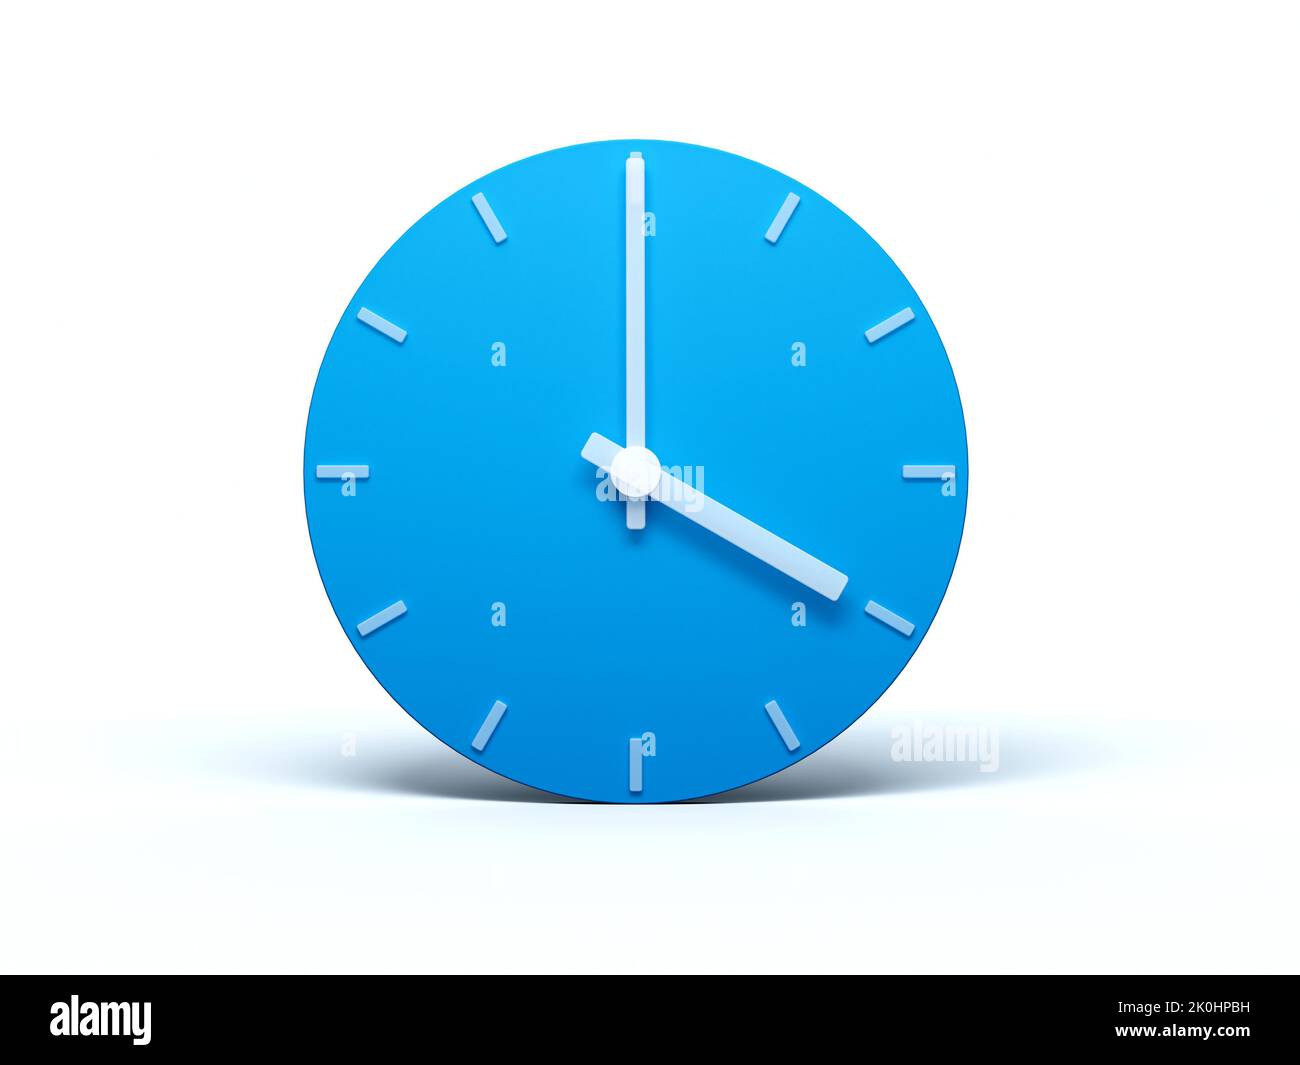 A 3d illustration of a blue wall clock showing 4 o'clock isolated on white background Stock Photo